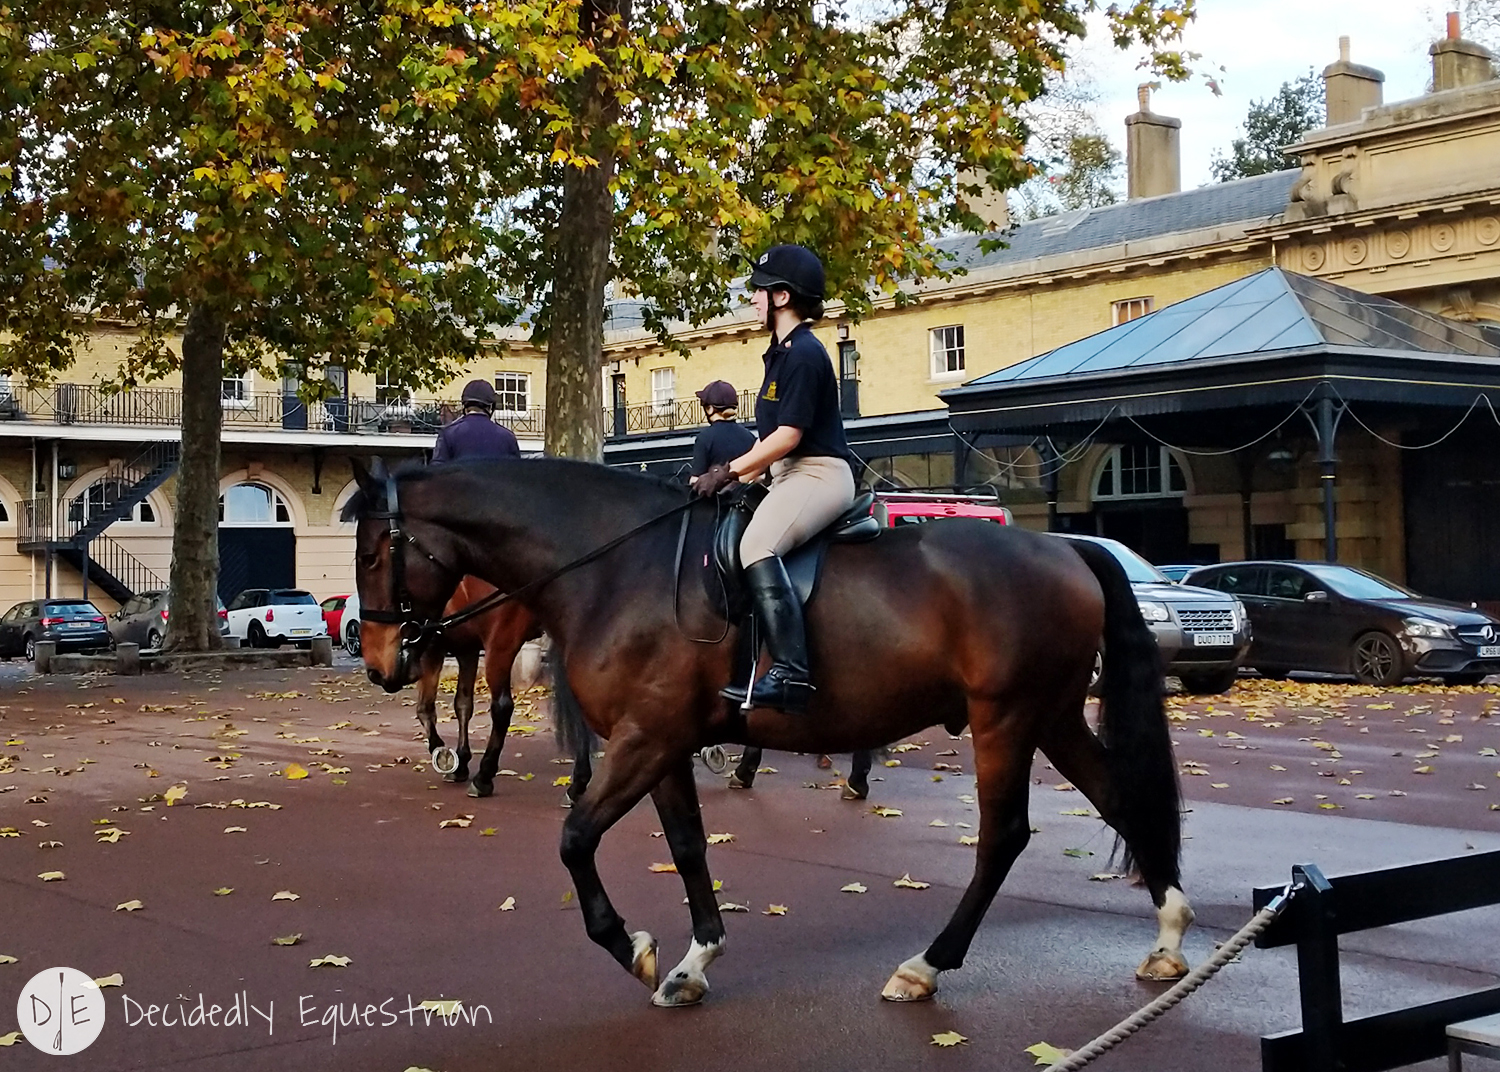 Finding Horses While Traveling - London - Royal Mews